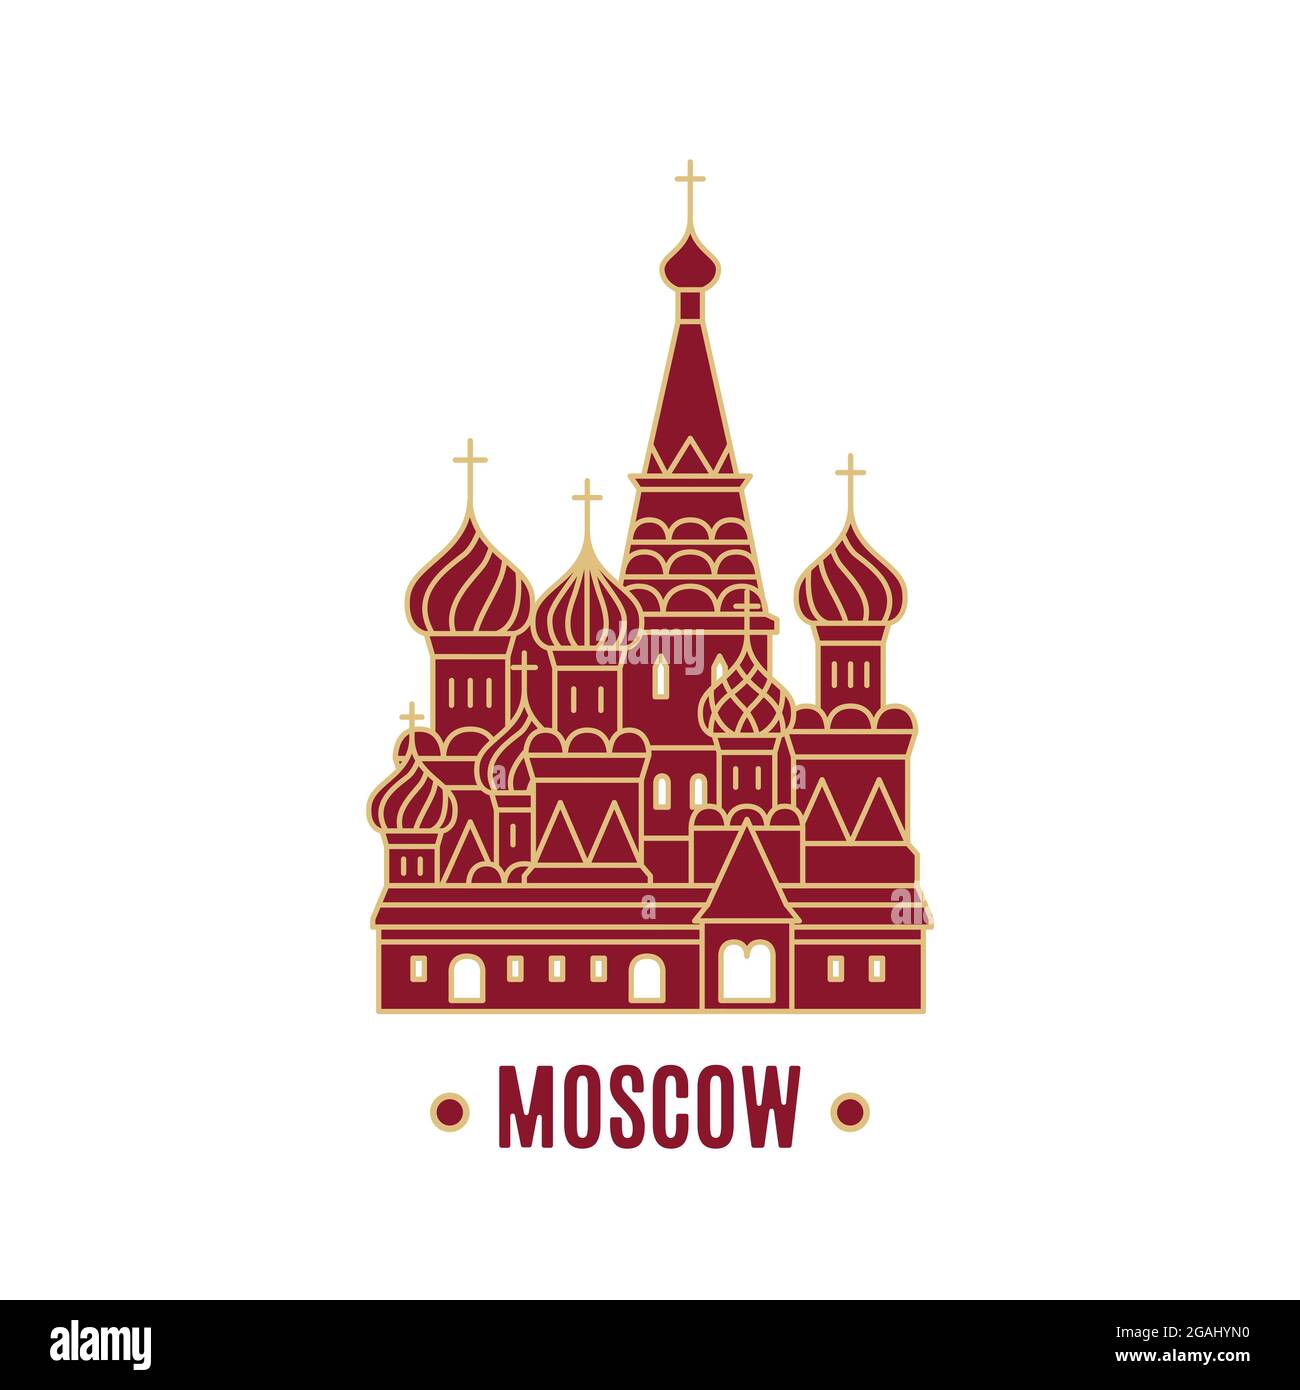 St. Basil's Cathedral vector illustration isolated on white background. Line art. Moscow landmark. Stock Vector